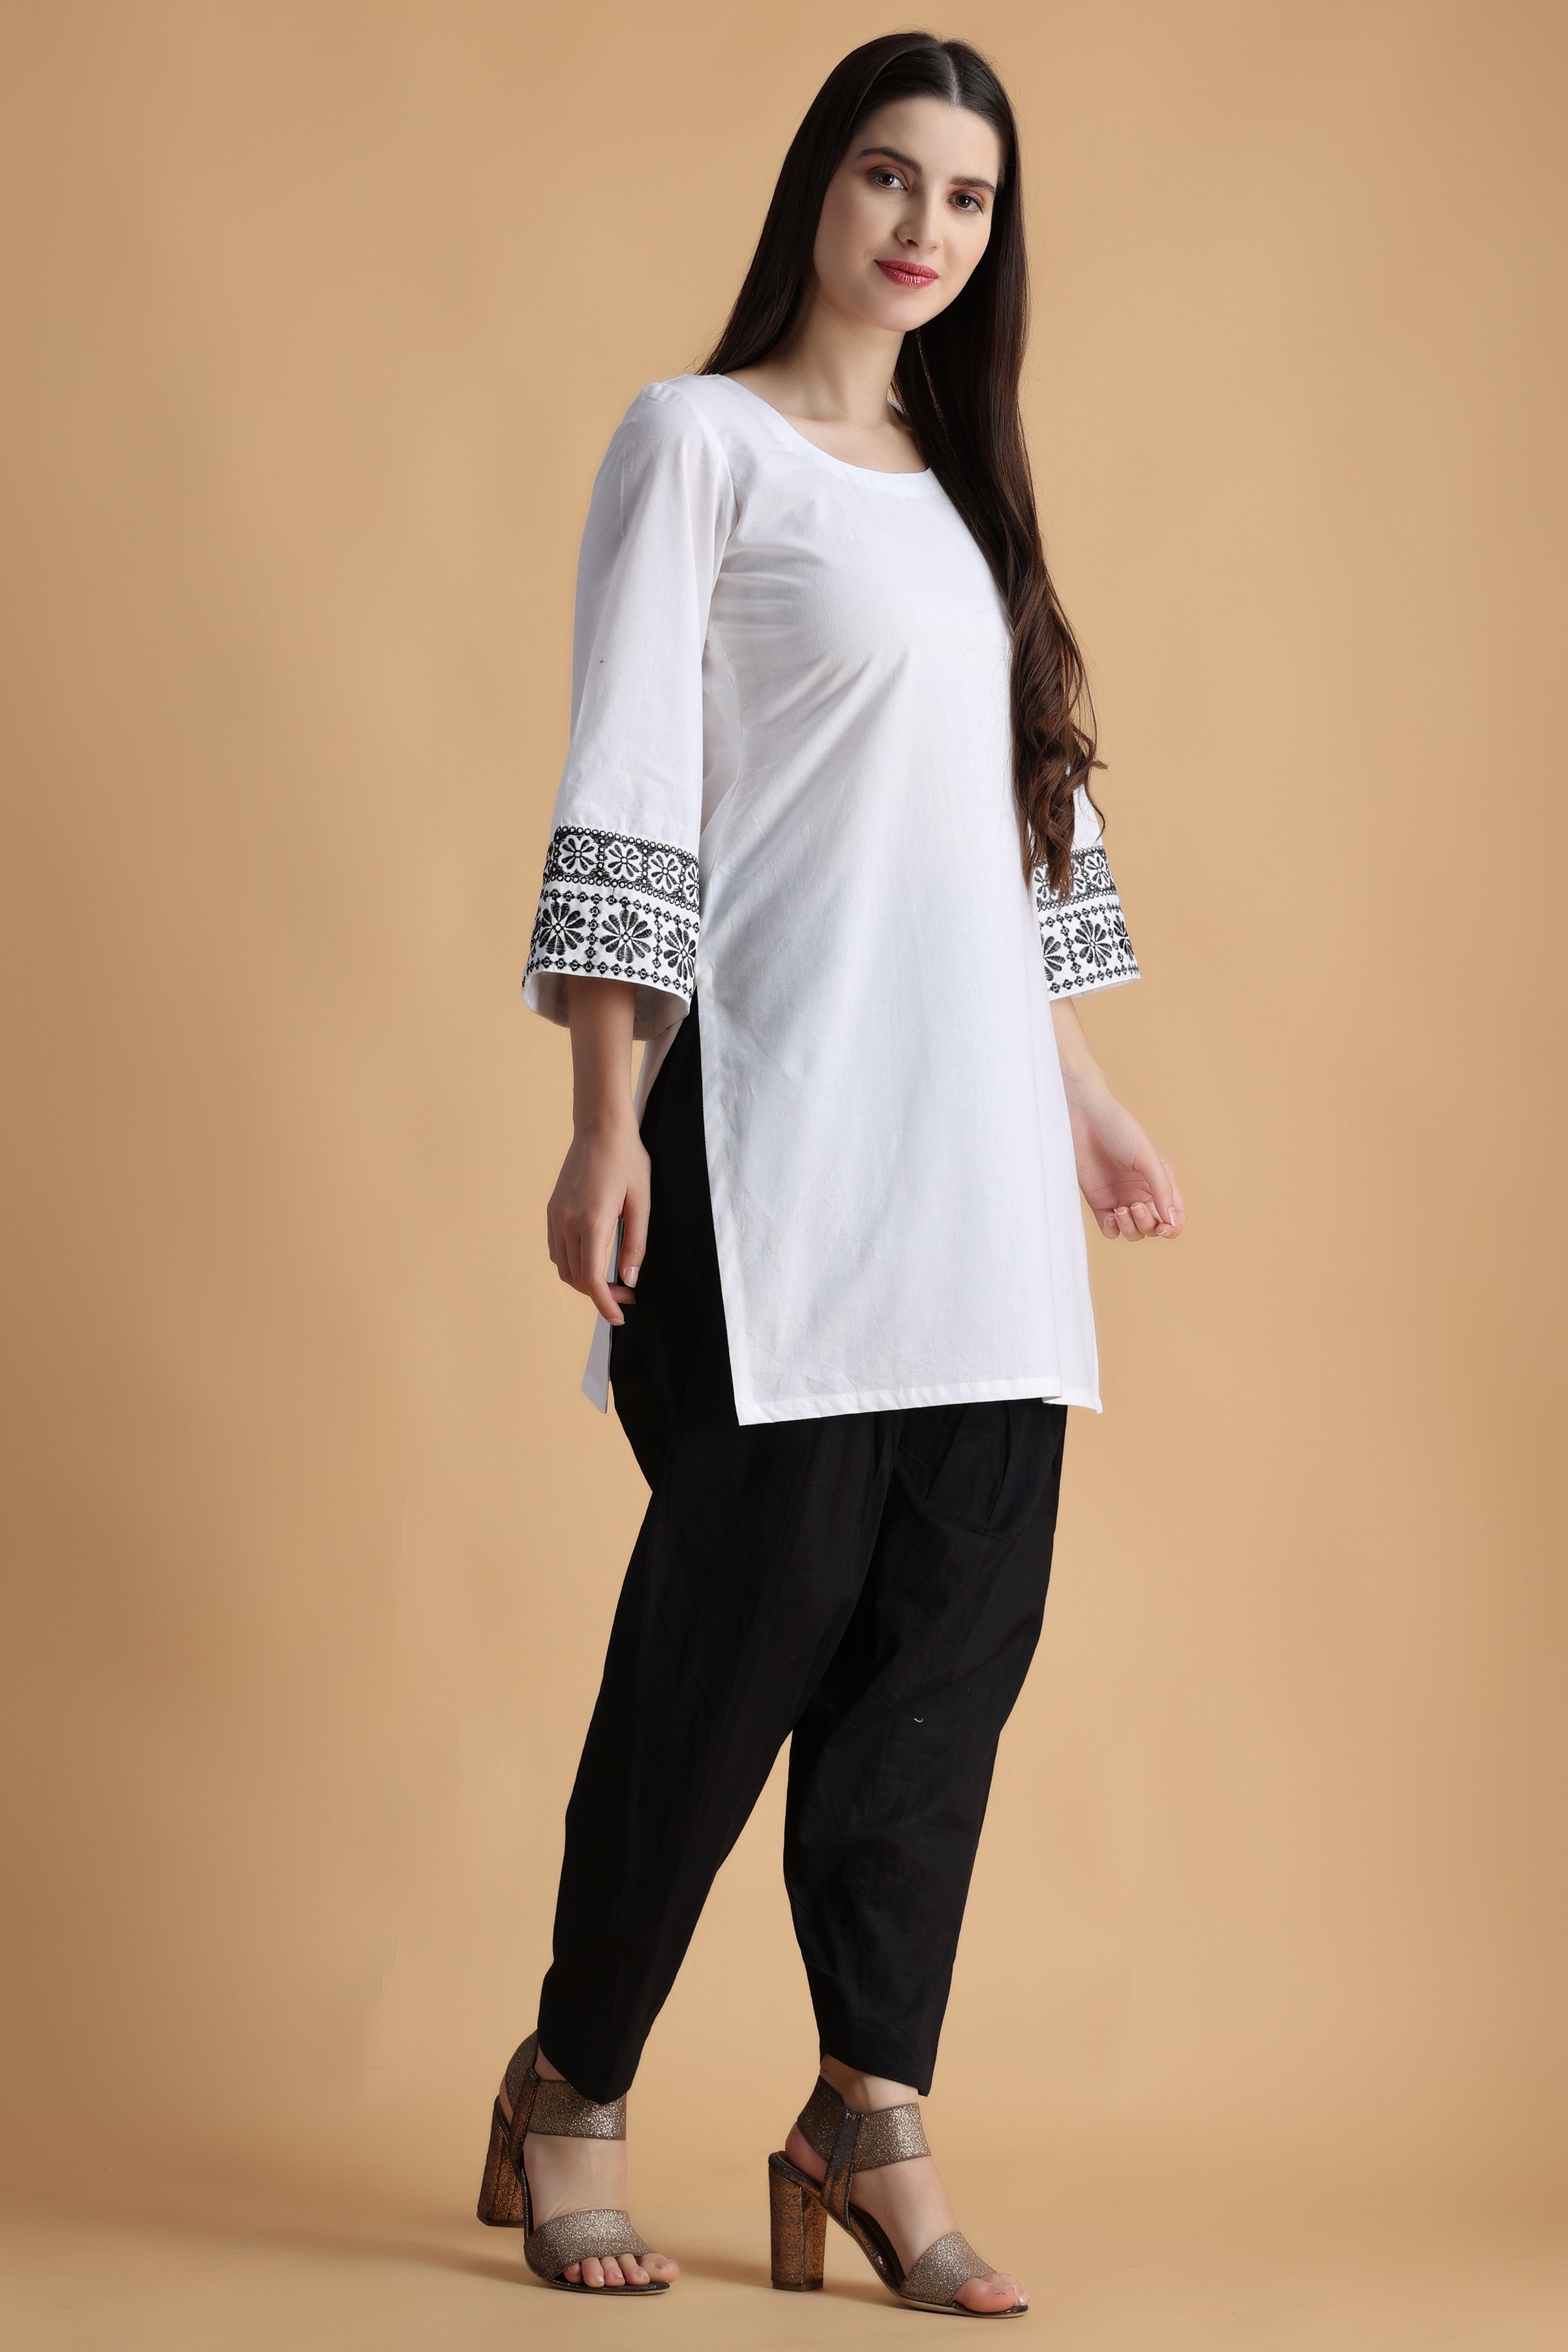 Cotton Embroidered Ladies White Short Kurti Top, Party wear at Rs 300 in  Jaipur